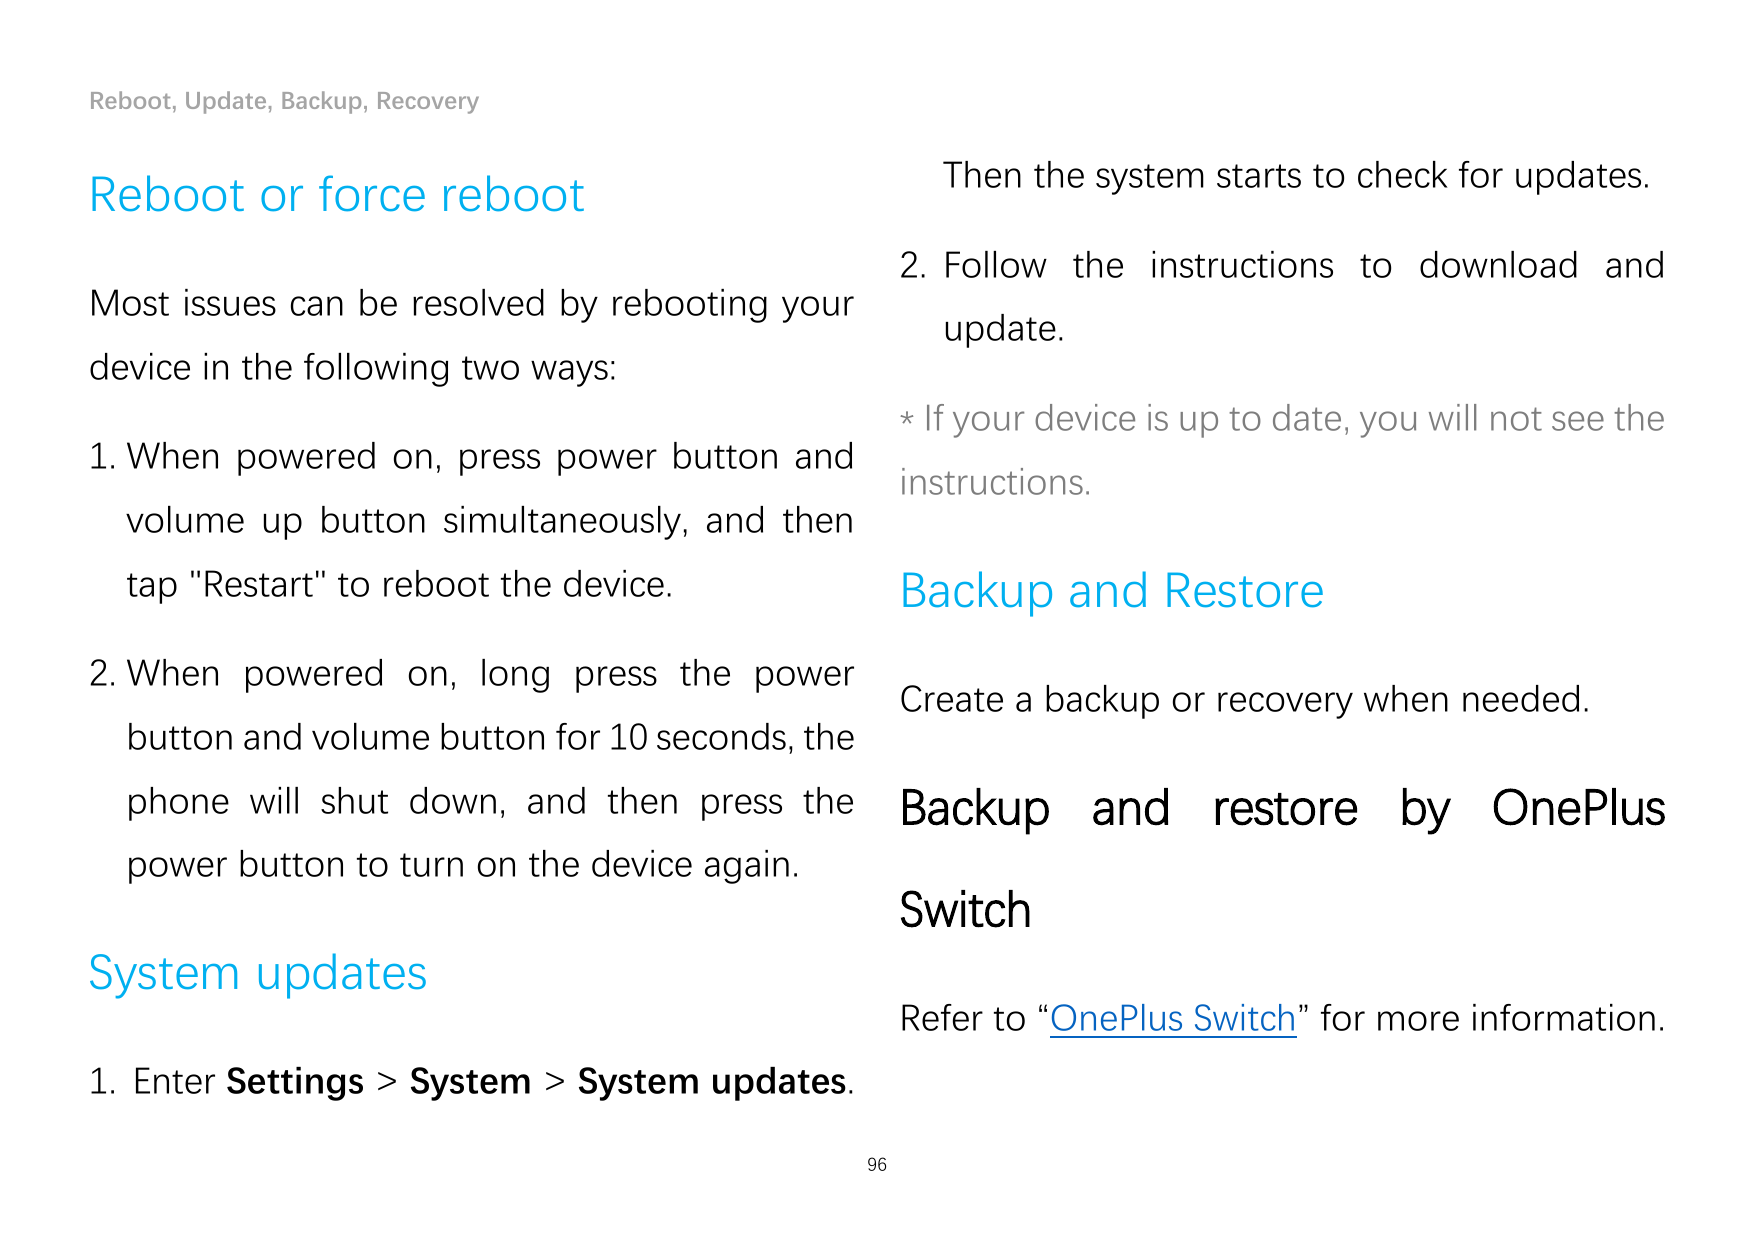 Reboot, Update, Backup, RecoveryThen the system starts to check for updates.Reboot or force reboot2. Follow the instructions to 